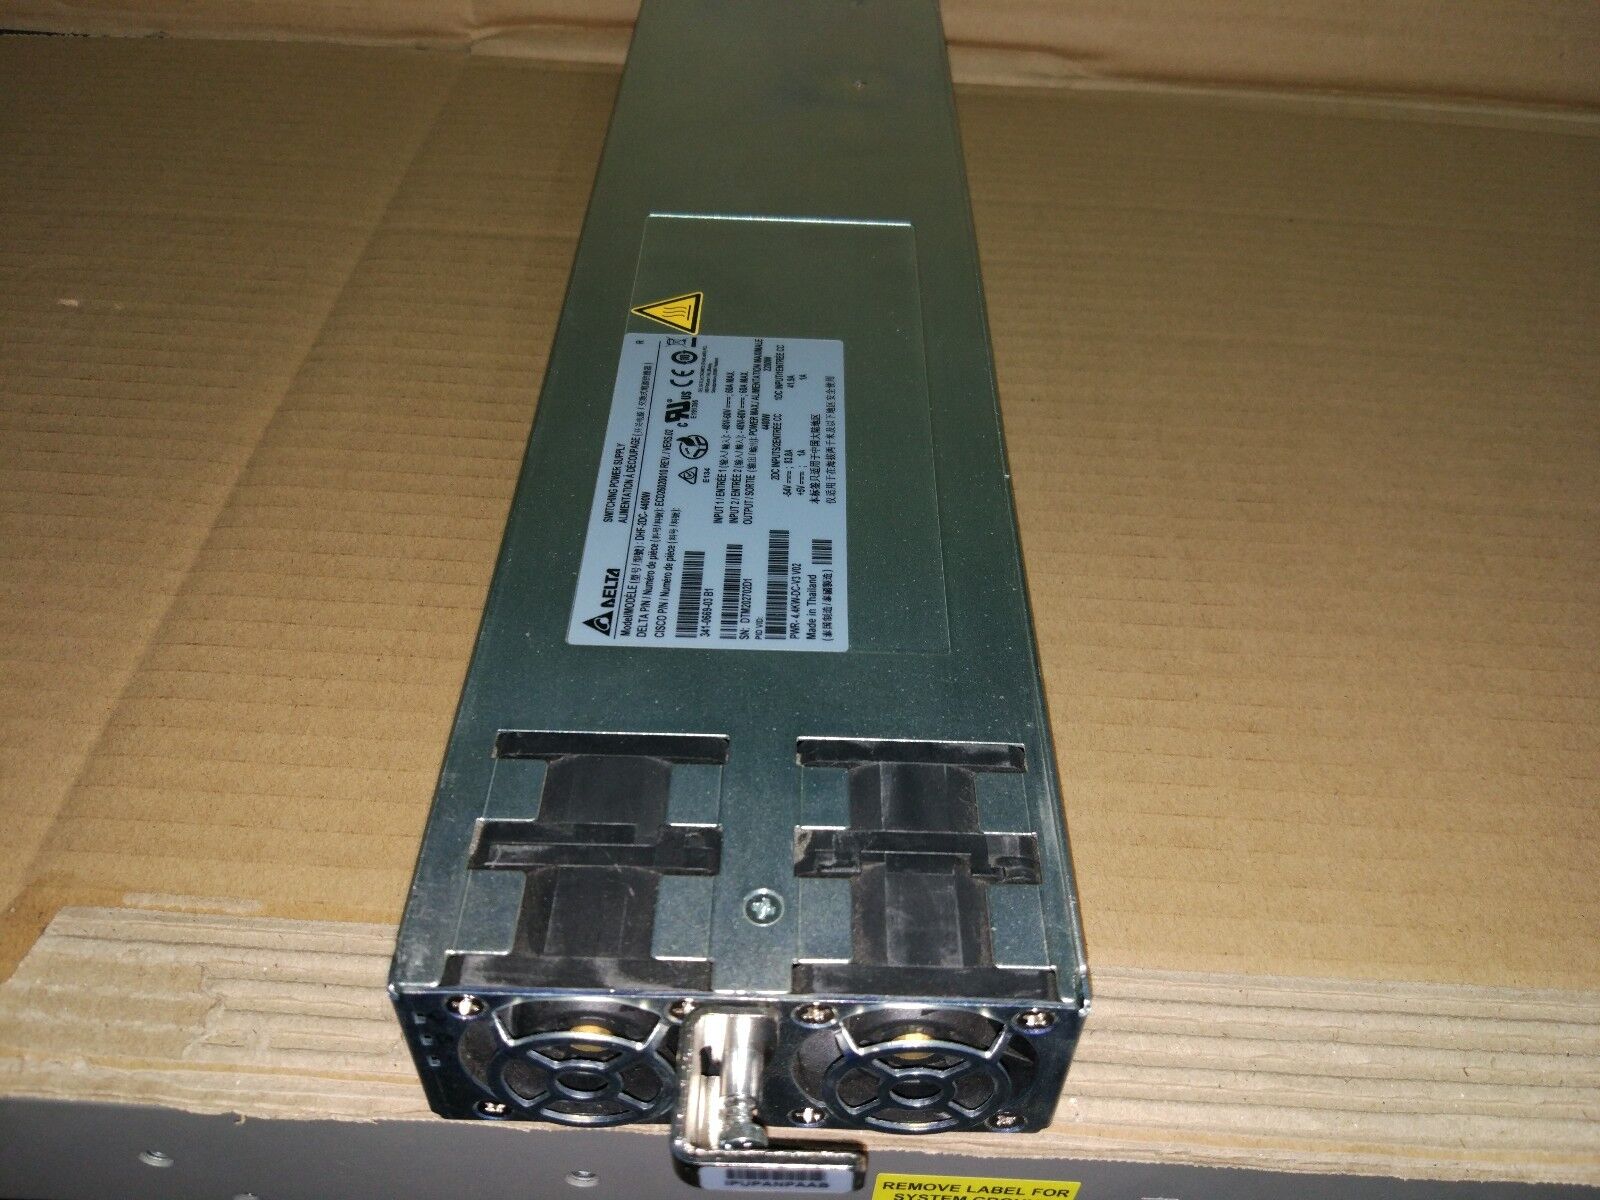  Genuine Cisco PWR-4.4KW-DC-V3 DC  Power Suply for ASR 9000 Series Tested 